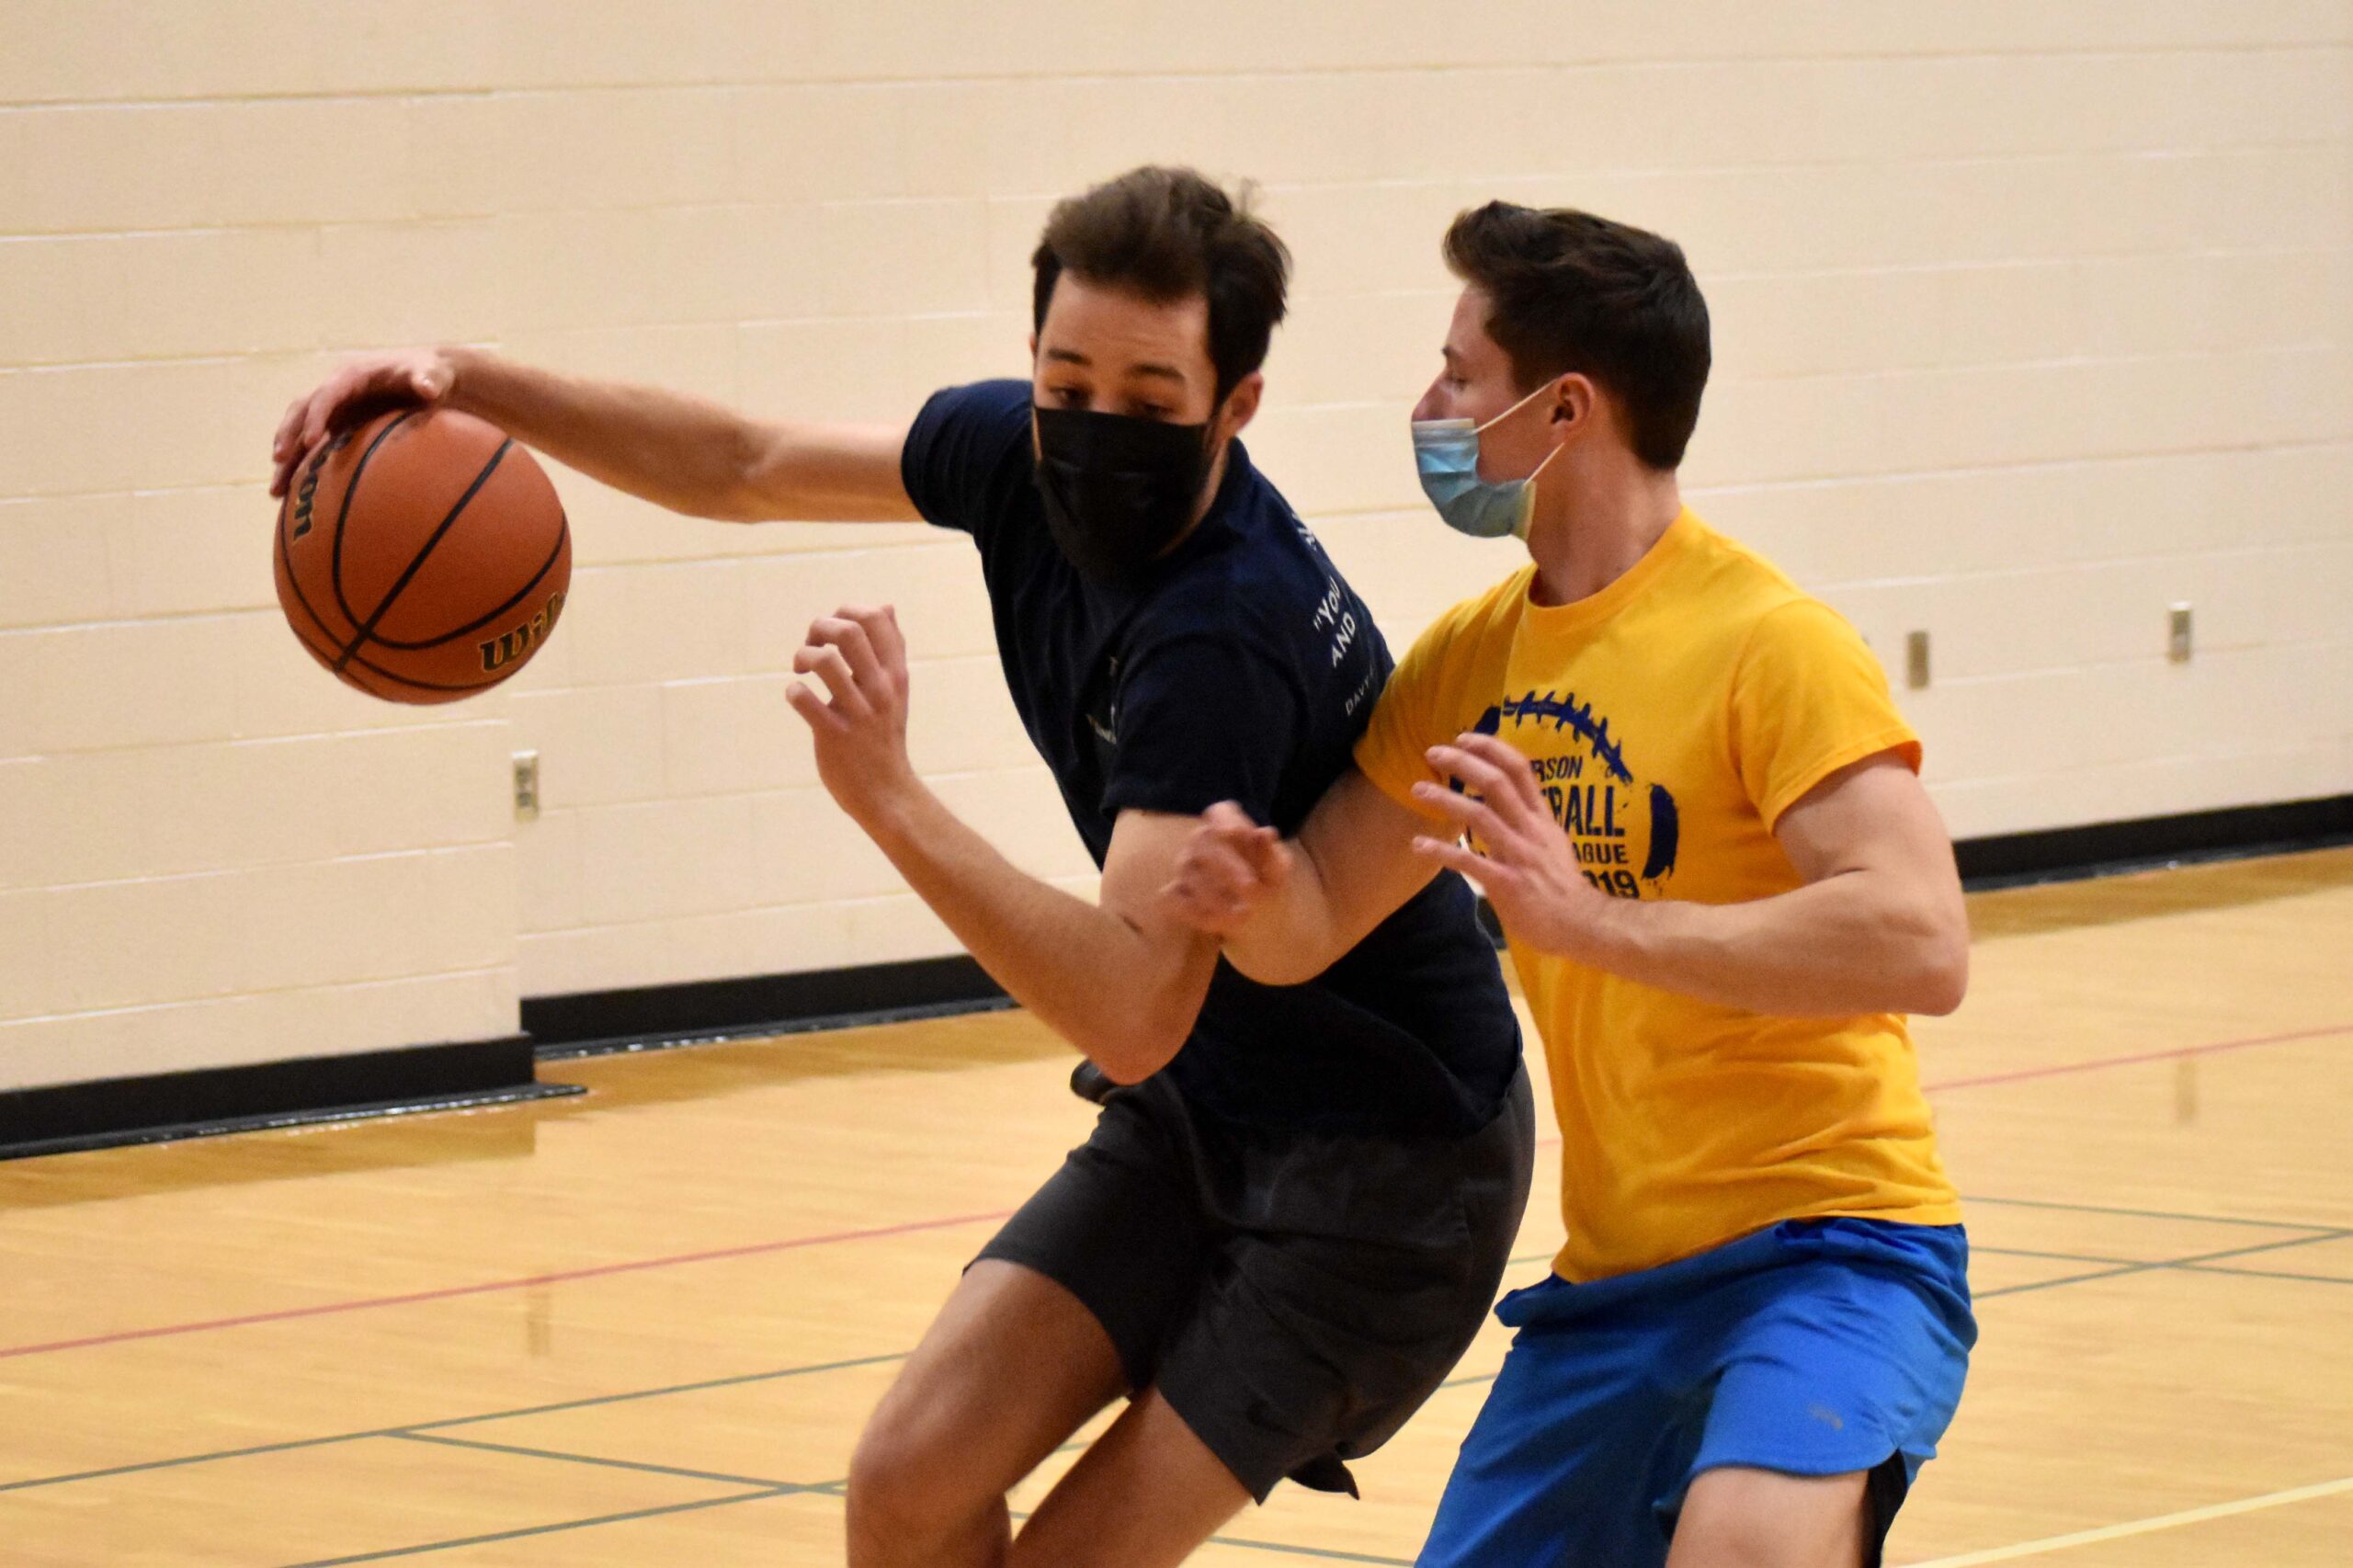 guy dribbling with someone guarding him